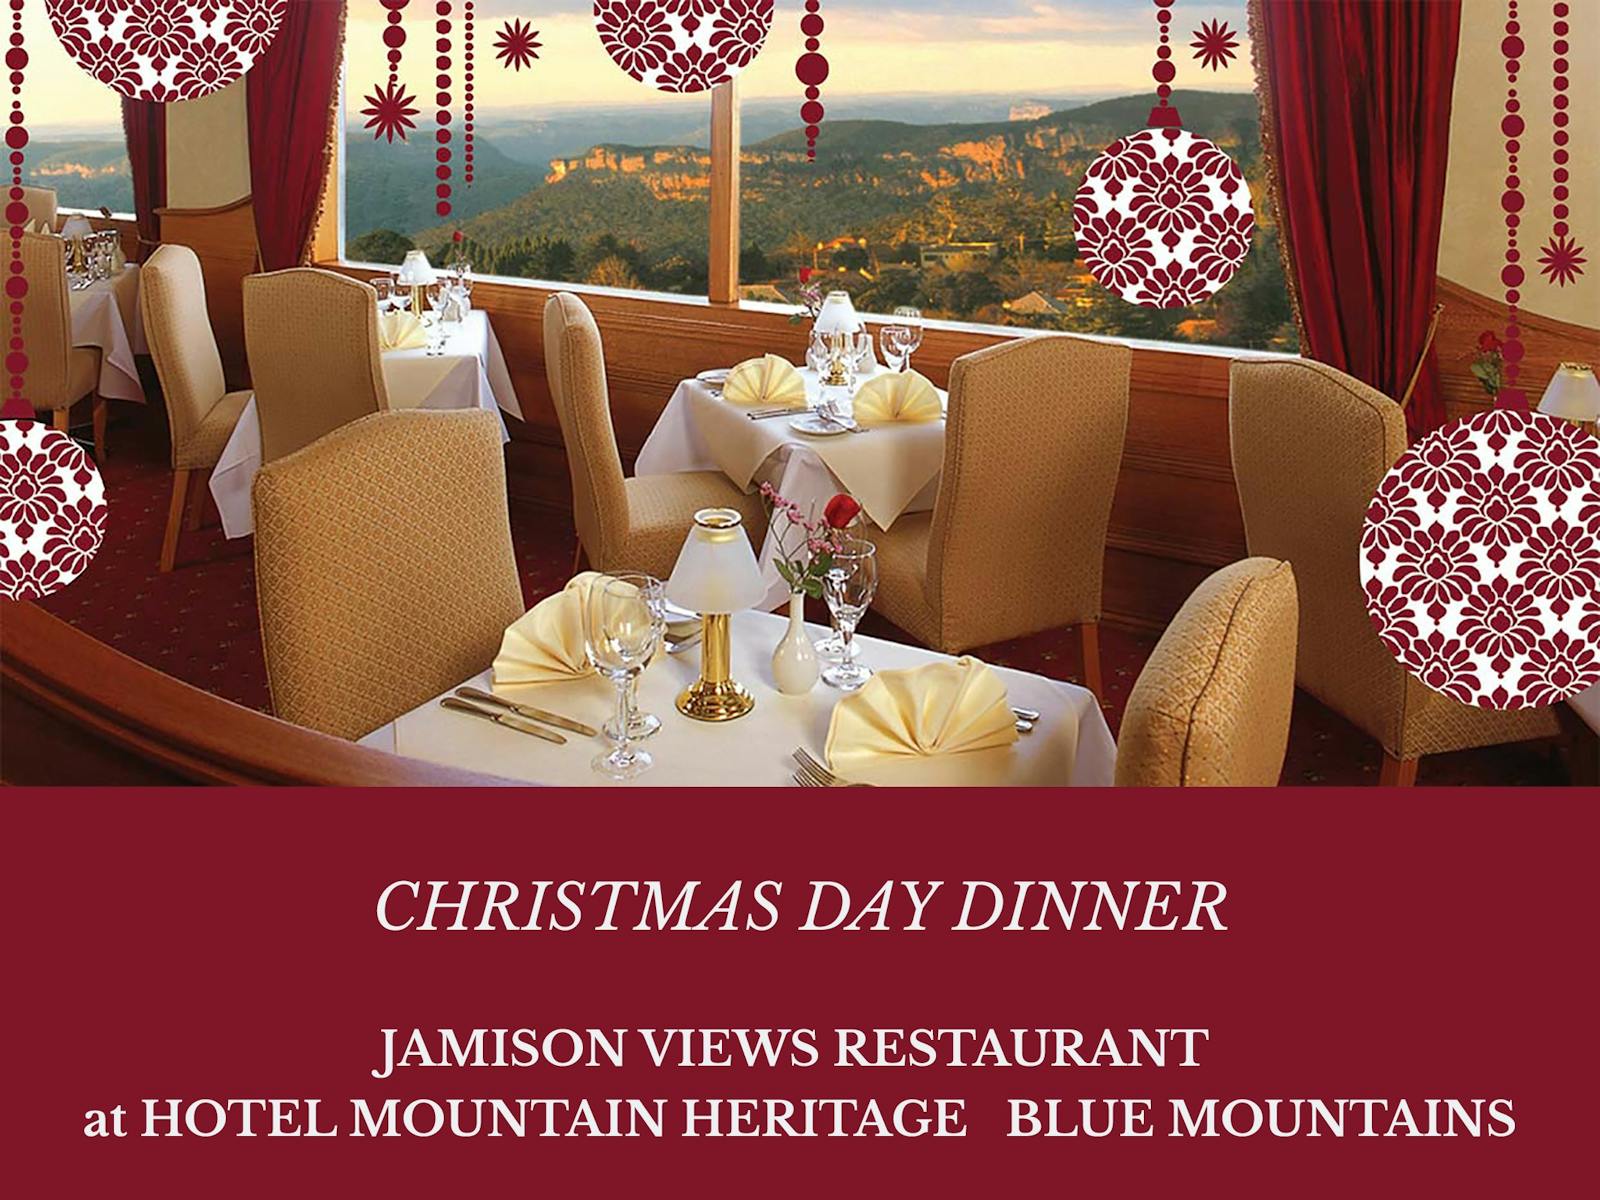 Image for Christmas Day Dinner Hotel Mountain Heritage